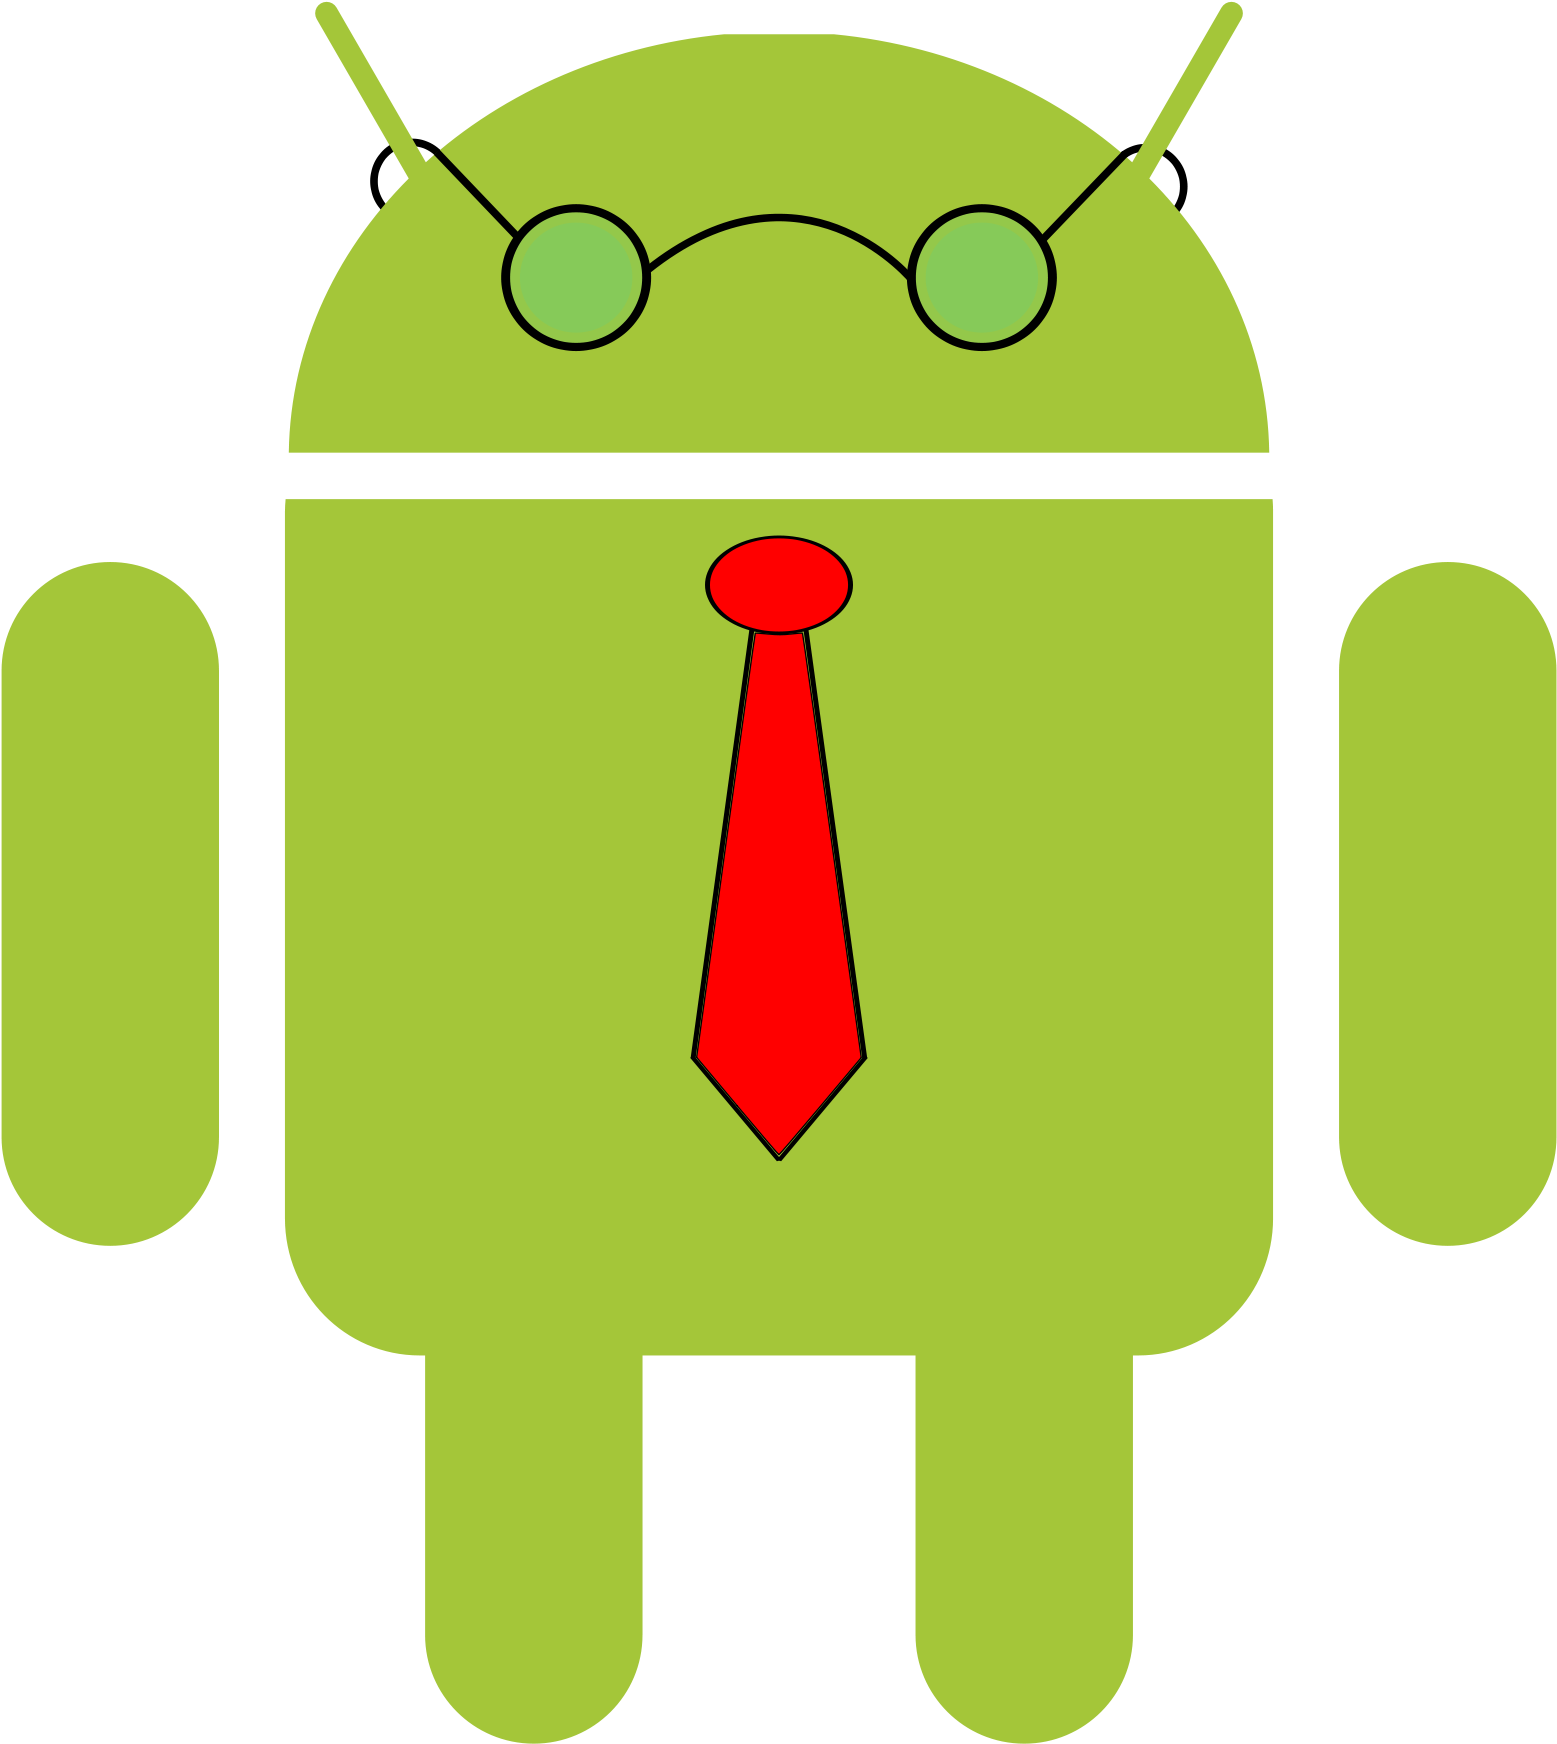 A Green Robot With A Tie And Glasses